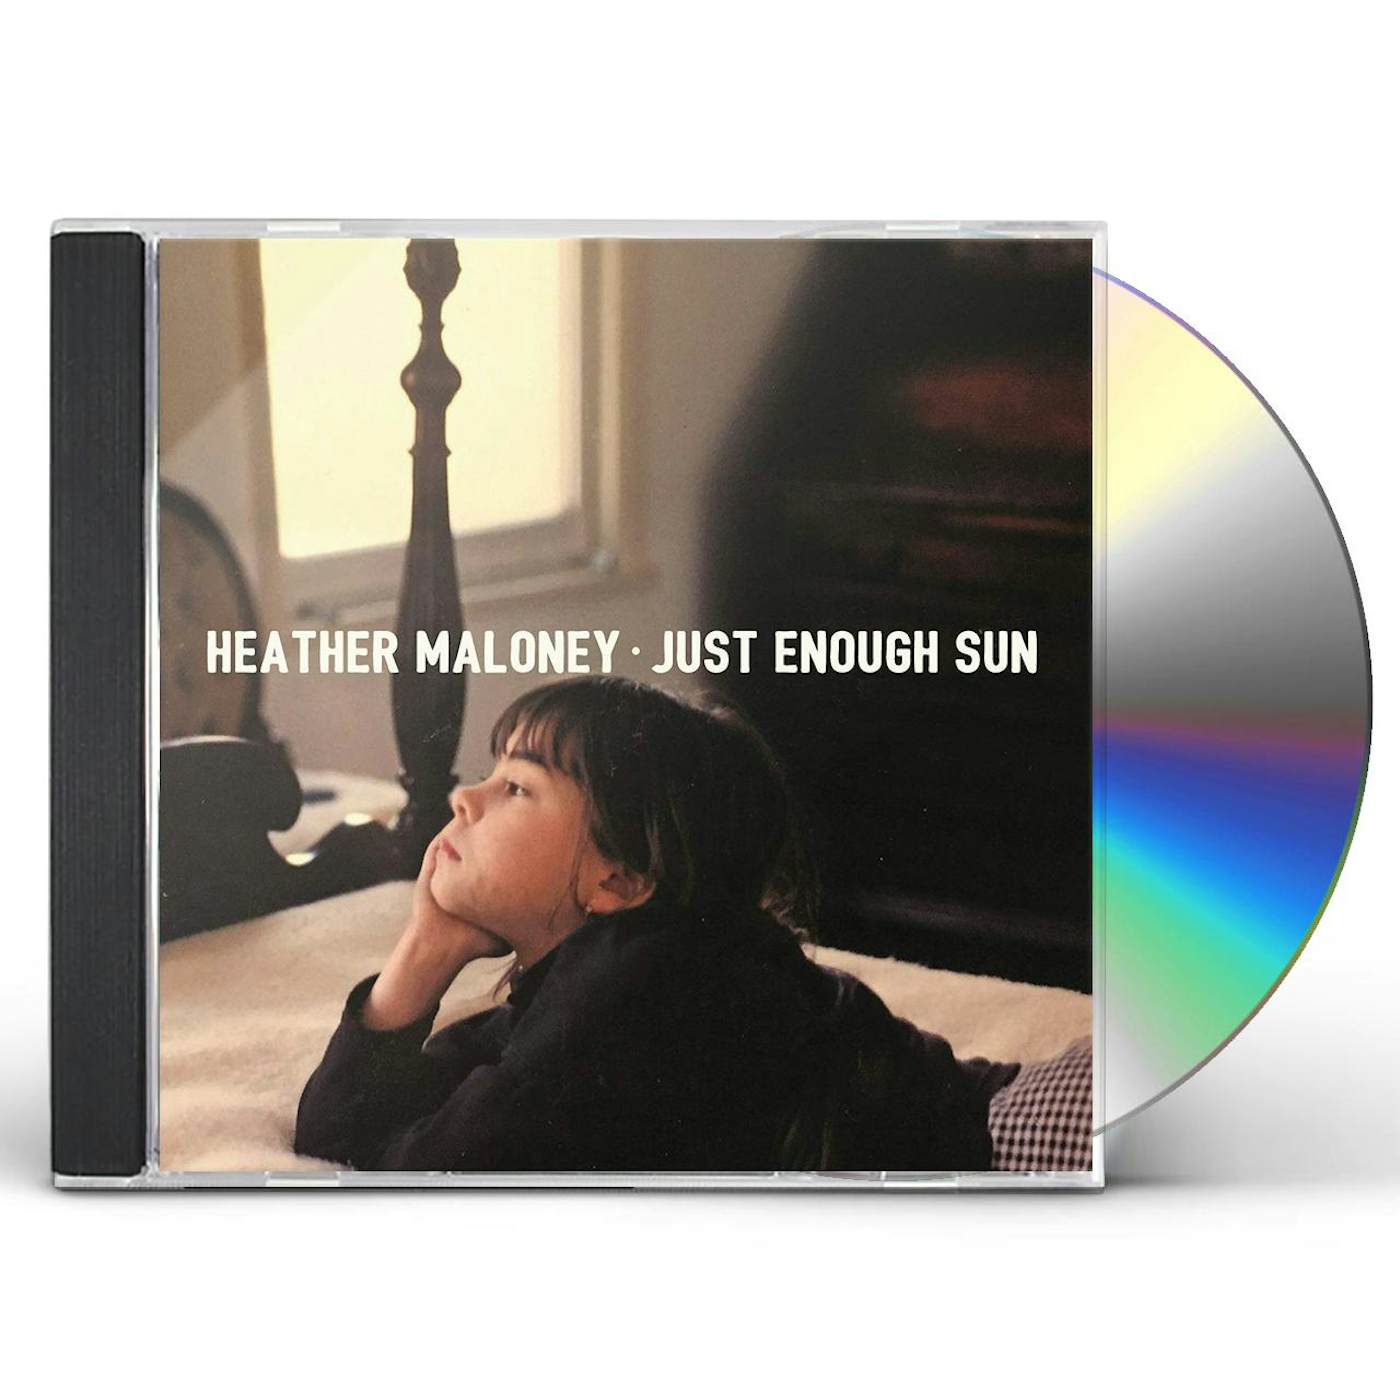 Heather Maloney JUST ENOUGH SUN CD